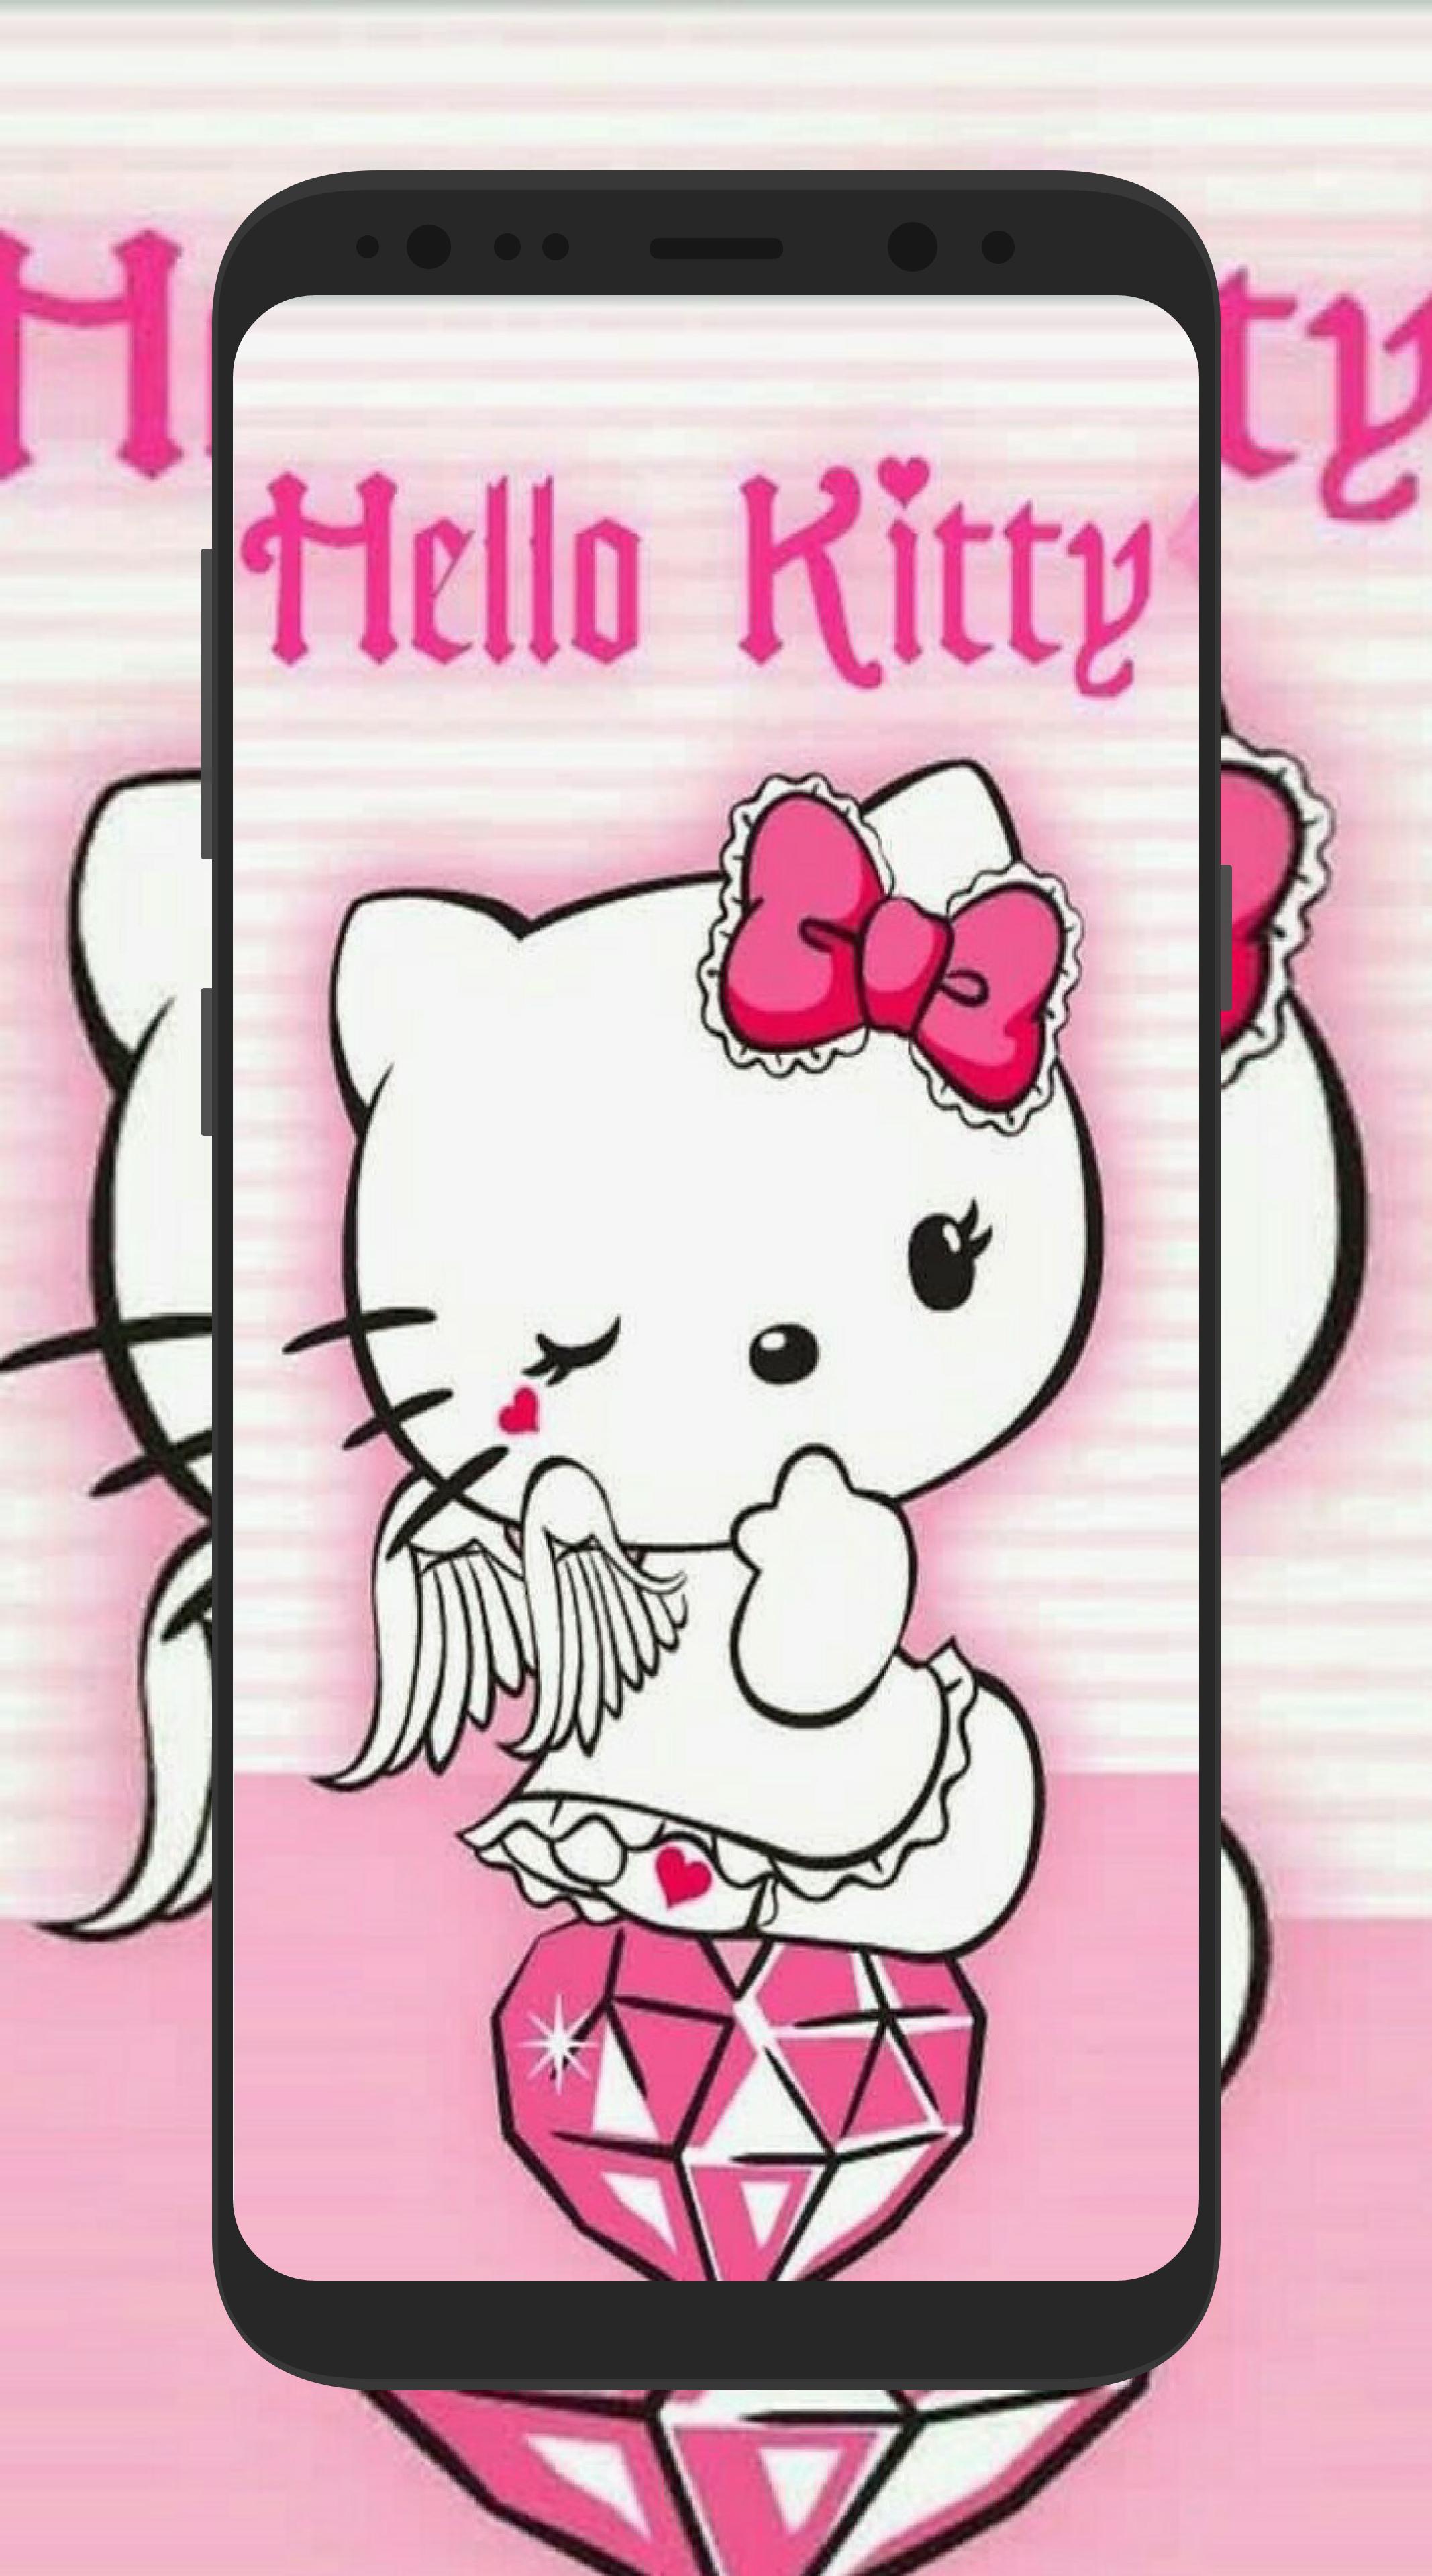 Kitty Cute Wallpaper For Android Apk